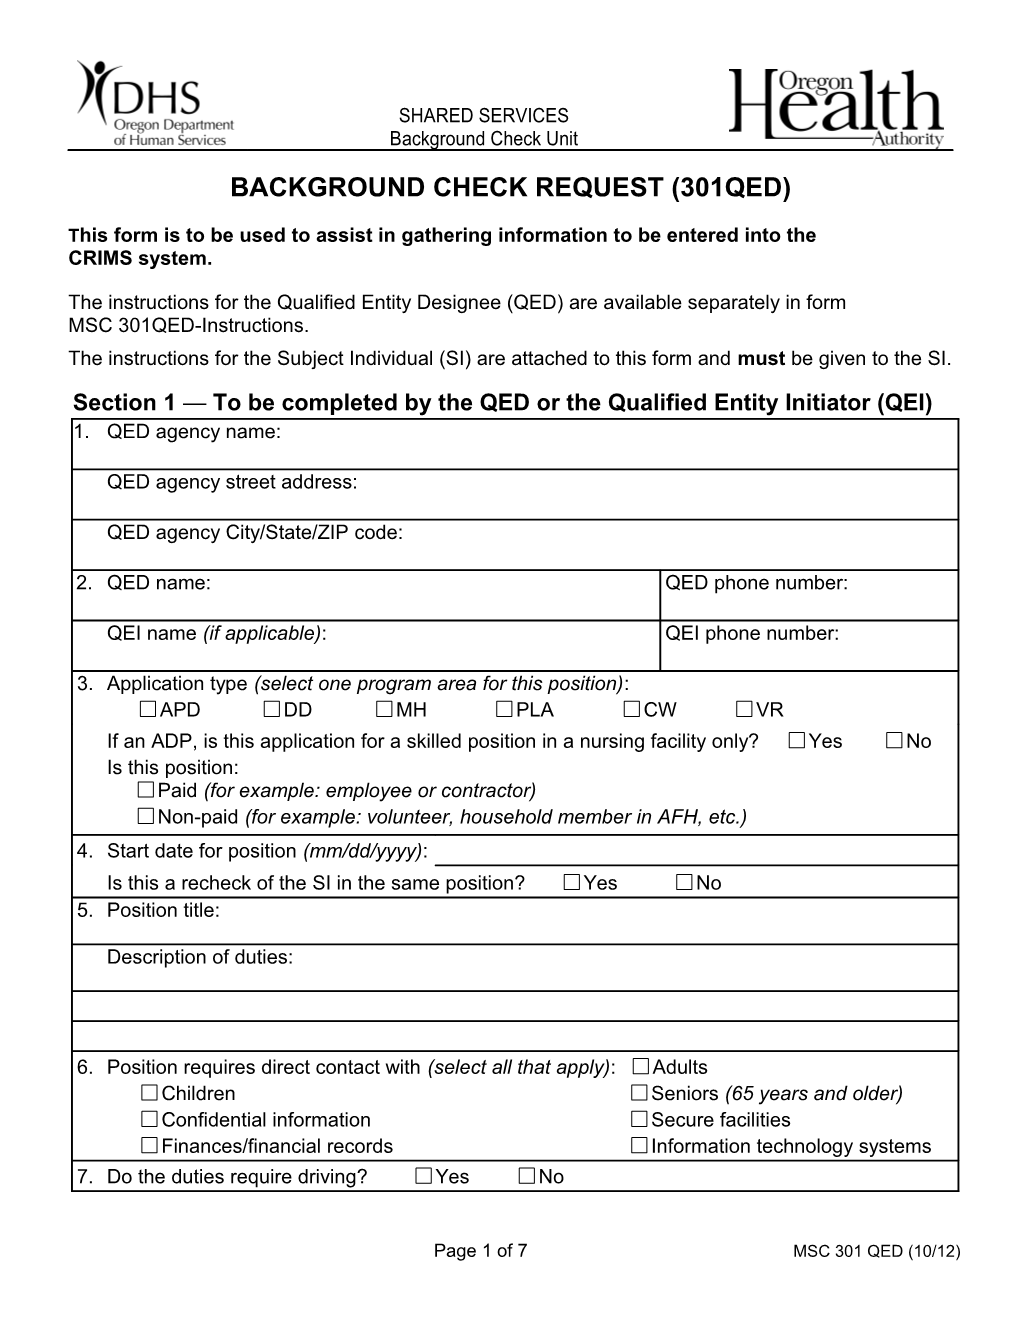 Background Check Request (301QED) 11/12